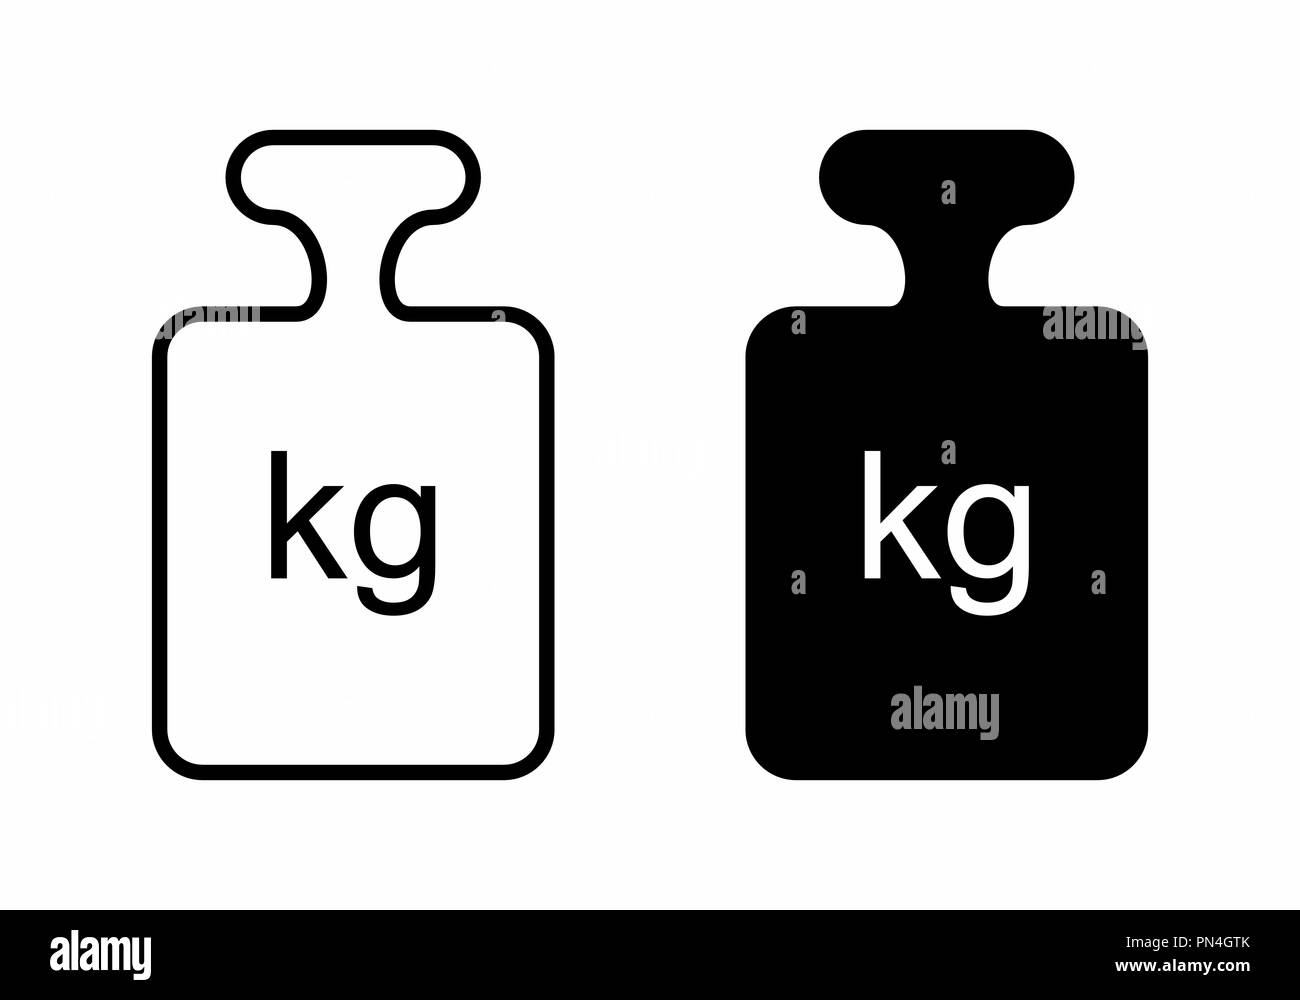 1kg weight Stock Vector Images - Alamy